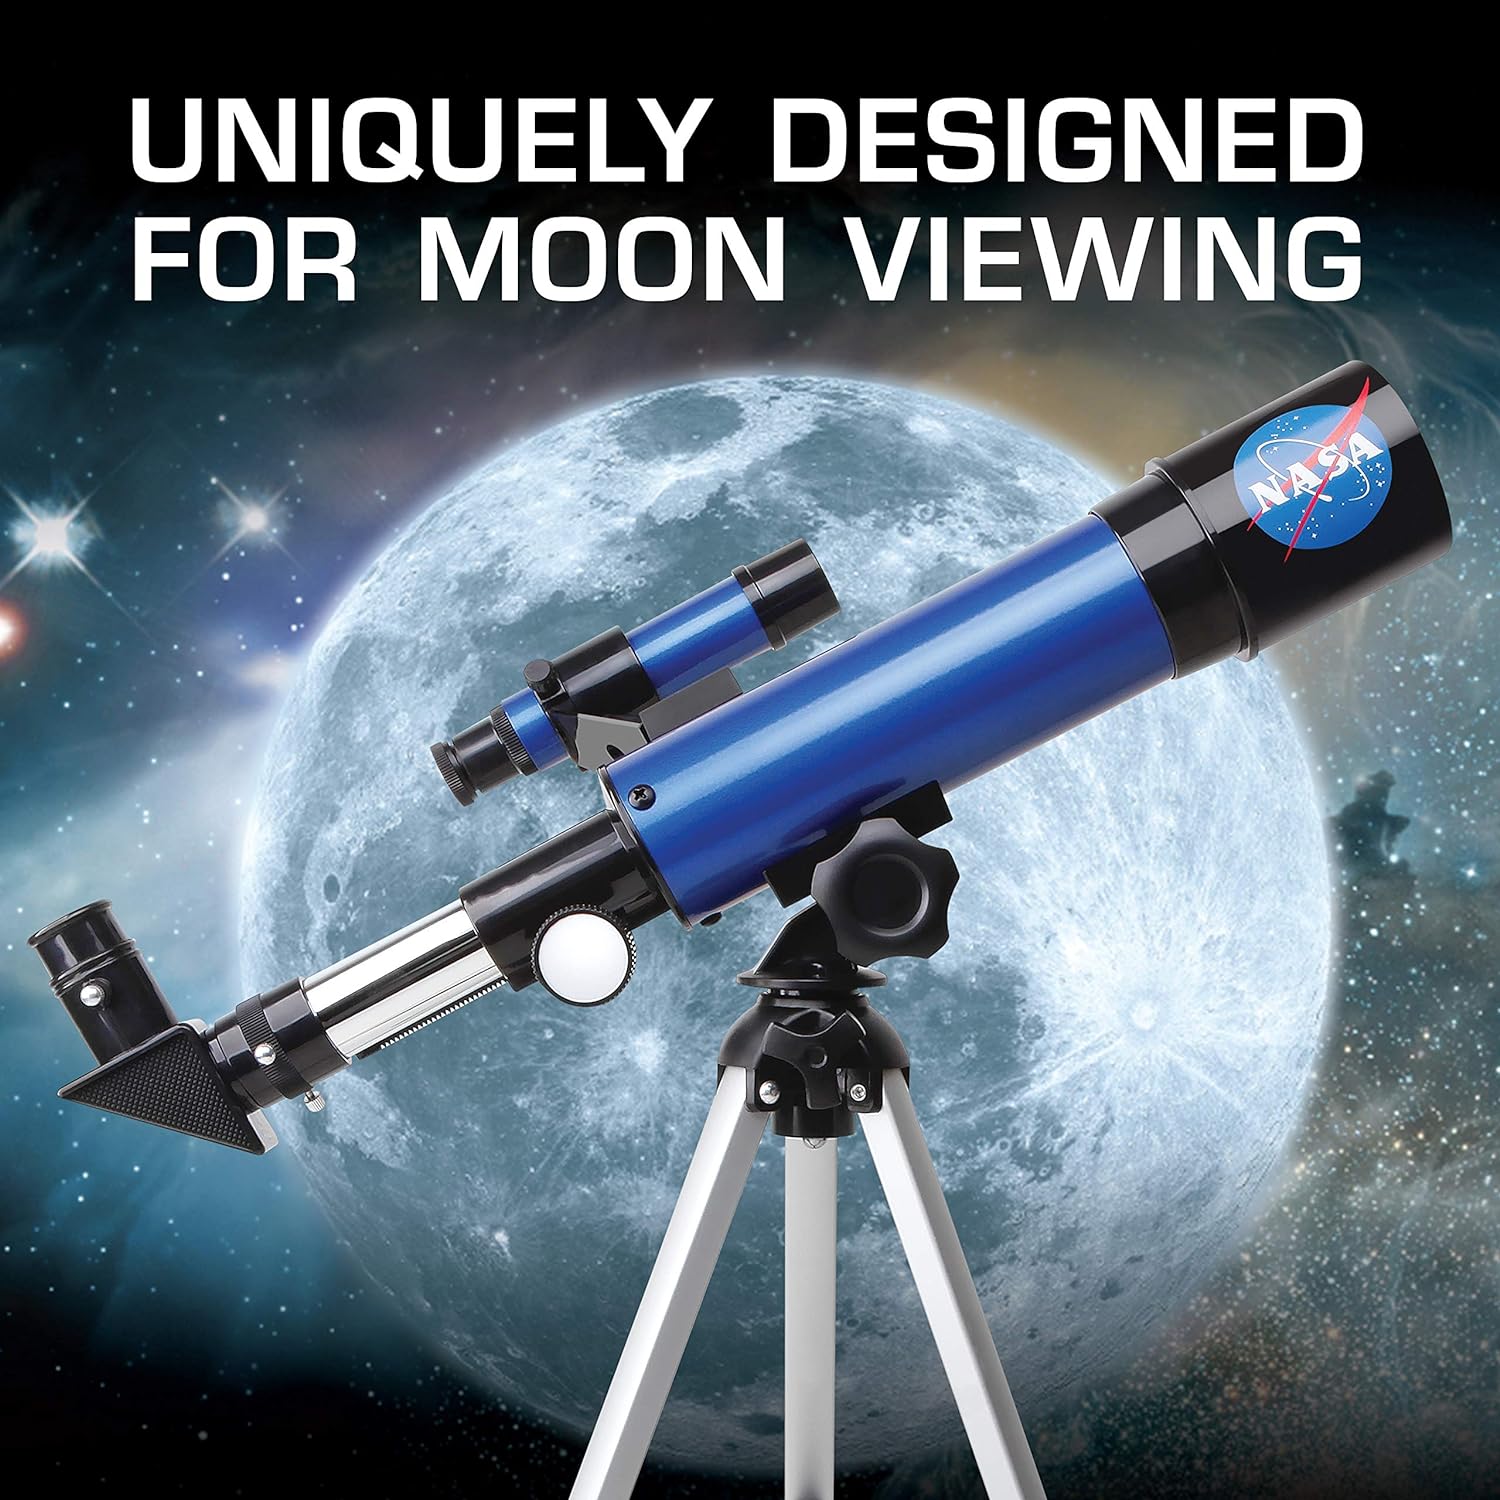 NASA Lunar Telescope for Kids – 90x Magnification, Includes Two Eyepieces, Tabletop Tripod, and Finder Scope- Kids Telescope for Astronomy Beginners, Space Toys, NASA Gifts (Amazon Exclusive)